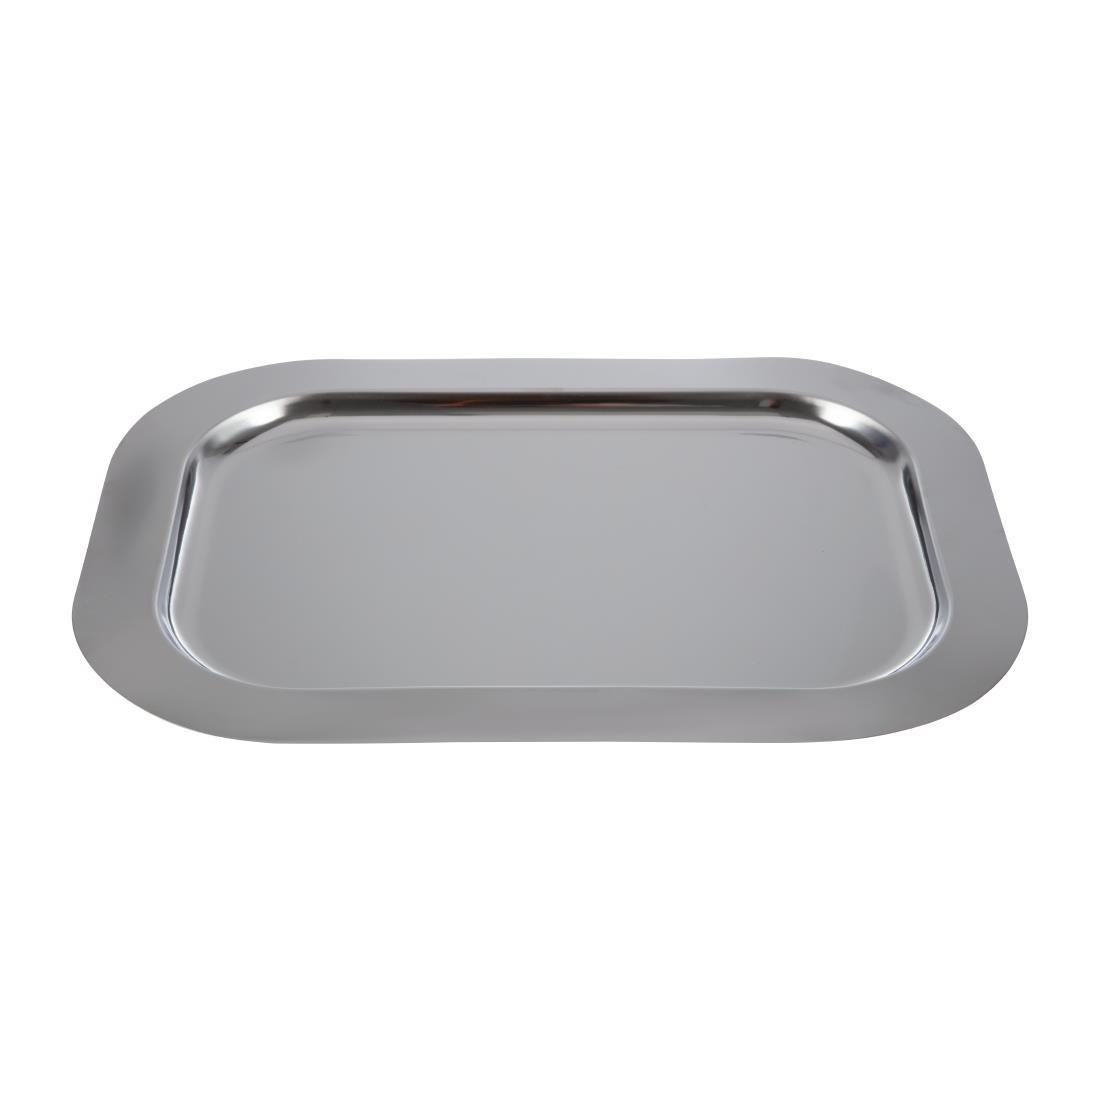 Rectangular Tray with Cover - F762  - 4